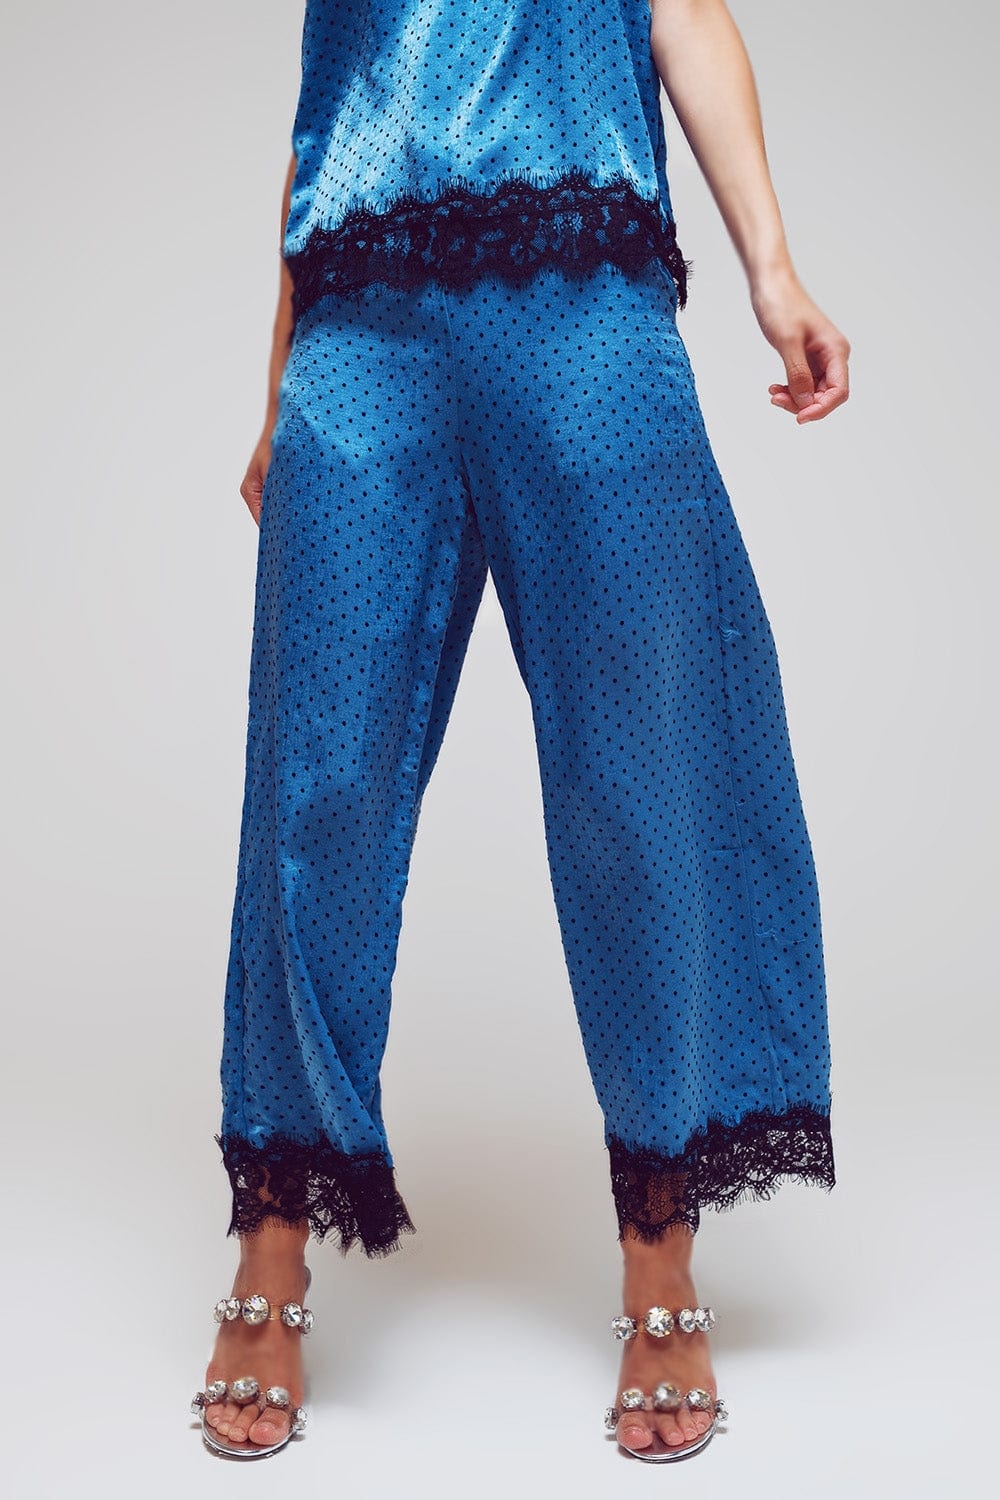 Q2 Women's Pants & Trousers Wide Dotted Pants With Lace At The Hems